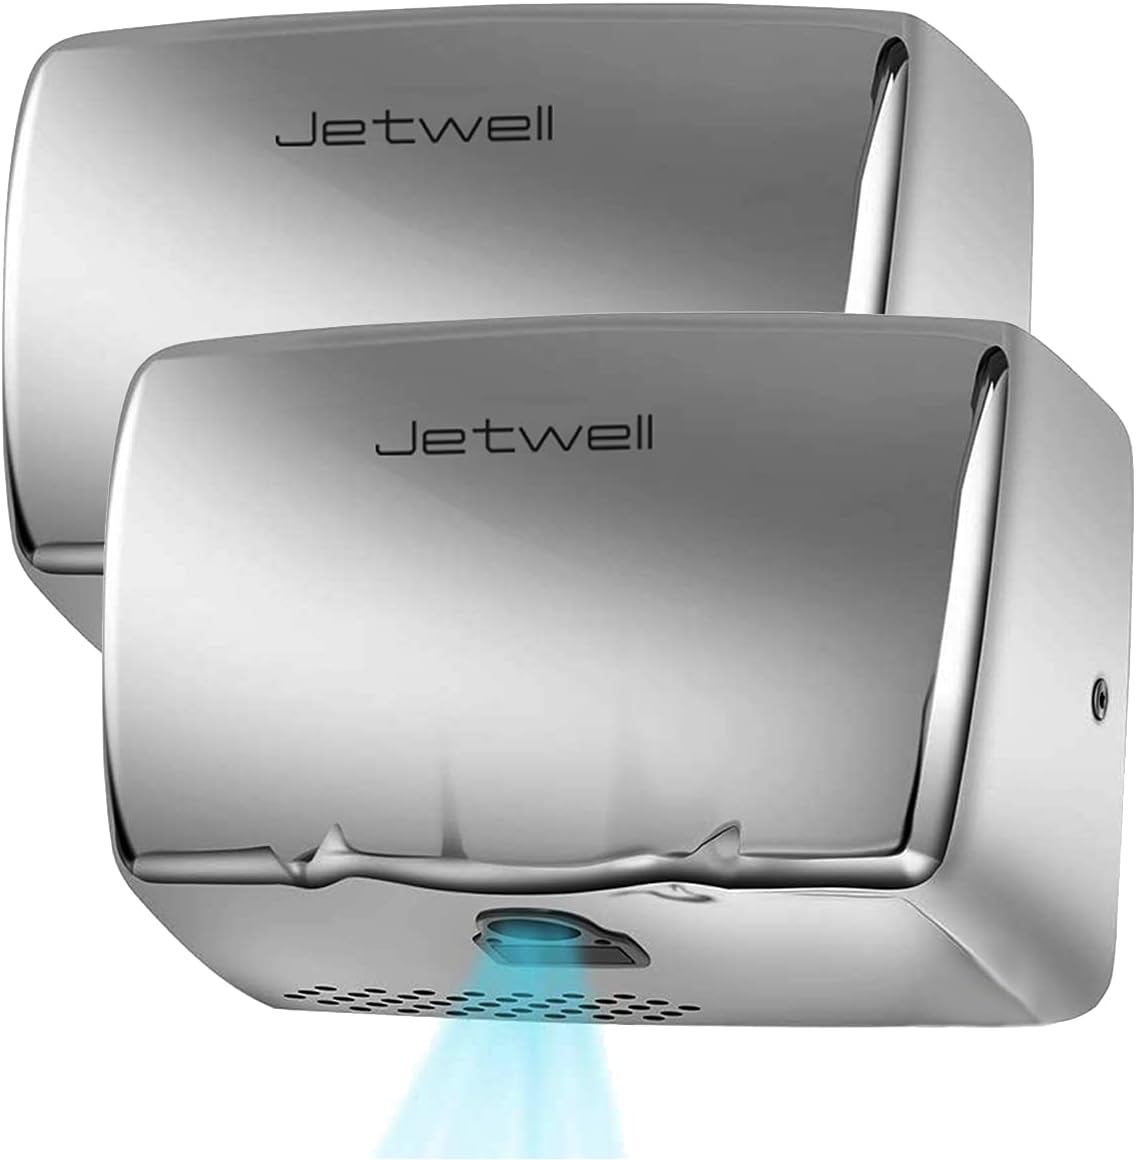 Goetland Stainless Steel Commercial Hand Dryer 224MPH Automatic High Speed Heavy Duty Dull Polished